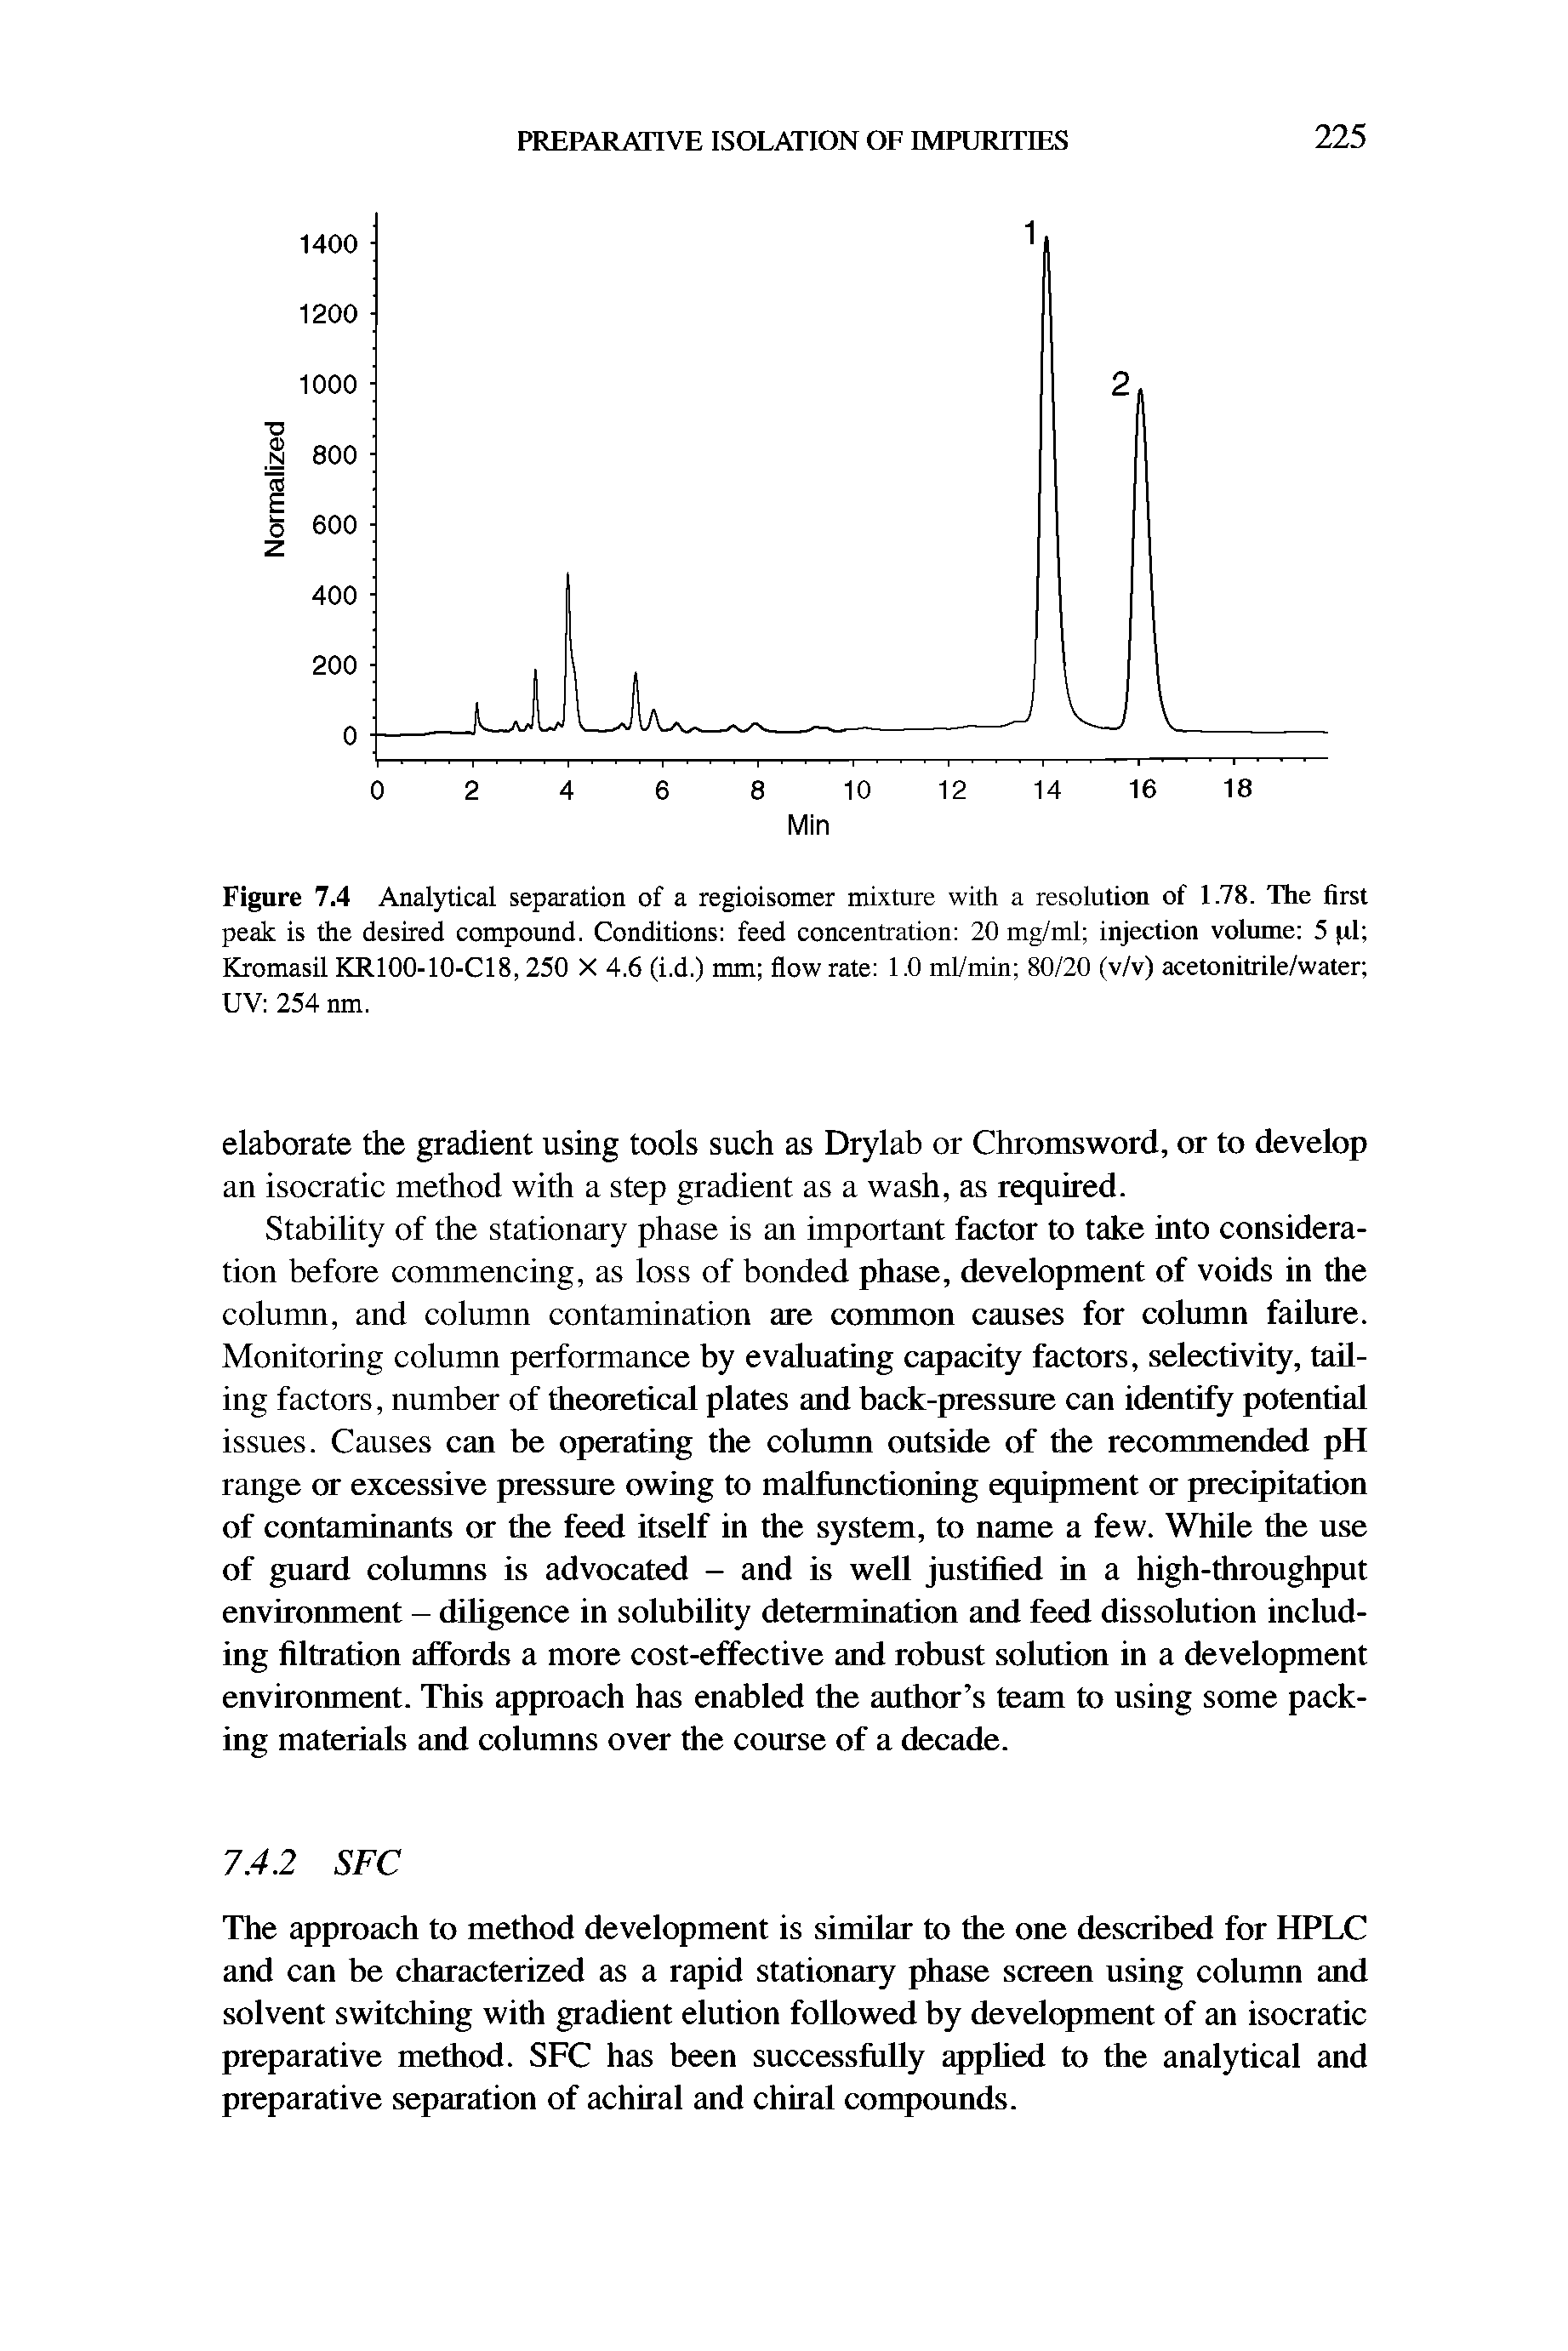 Figure 7.4 Analytical separation of a regioisomer mixture with a resolution of 1.78. The first peak is the desired compound. Conditions feed concentration 20 mg/ml injection volume 5 (il Kromasil KR100-10-C18, 250 X 4.6 (i.d.) mm flow rate 1.0 ml/min 80/20 (v/v) acetonitrile/water UV 254 nm.